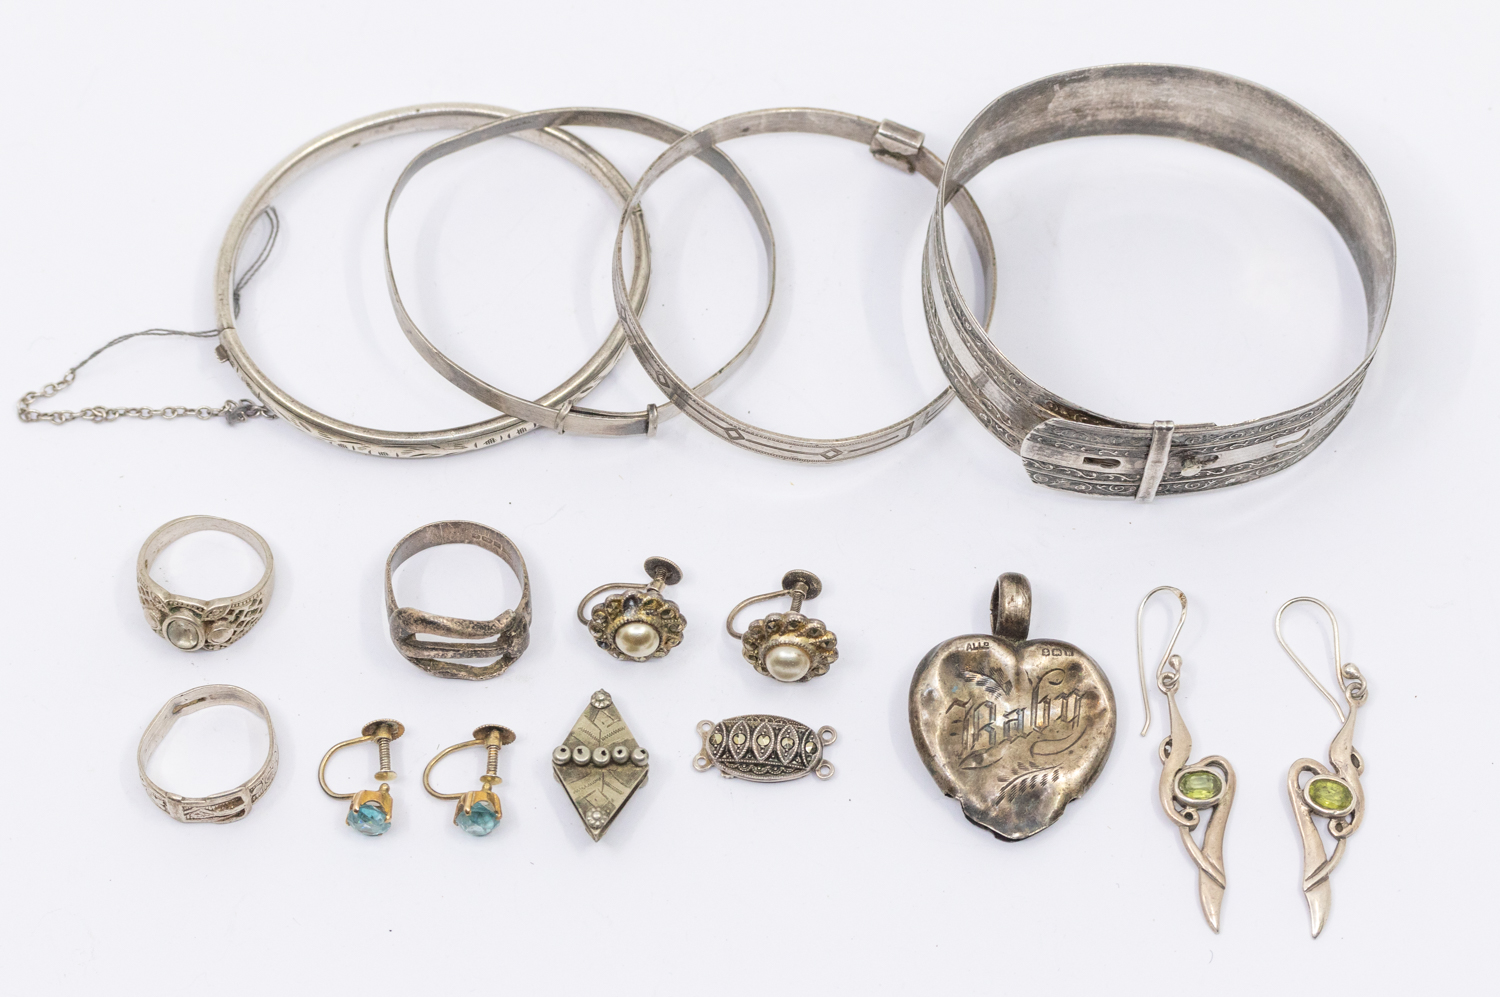 A quantity of antique & vintage silver jewellery including bangles, rings, pendants and earrings